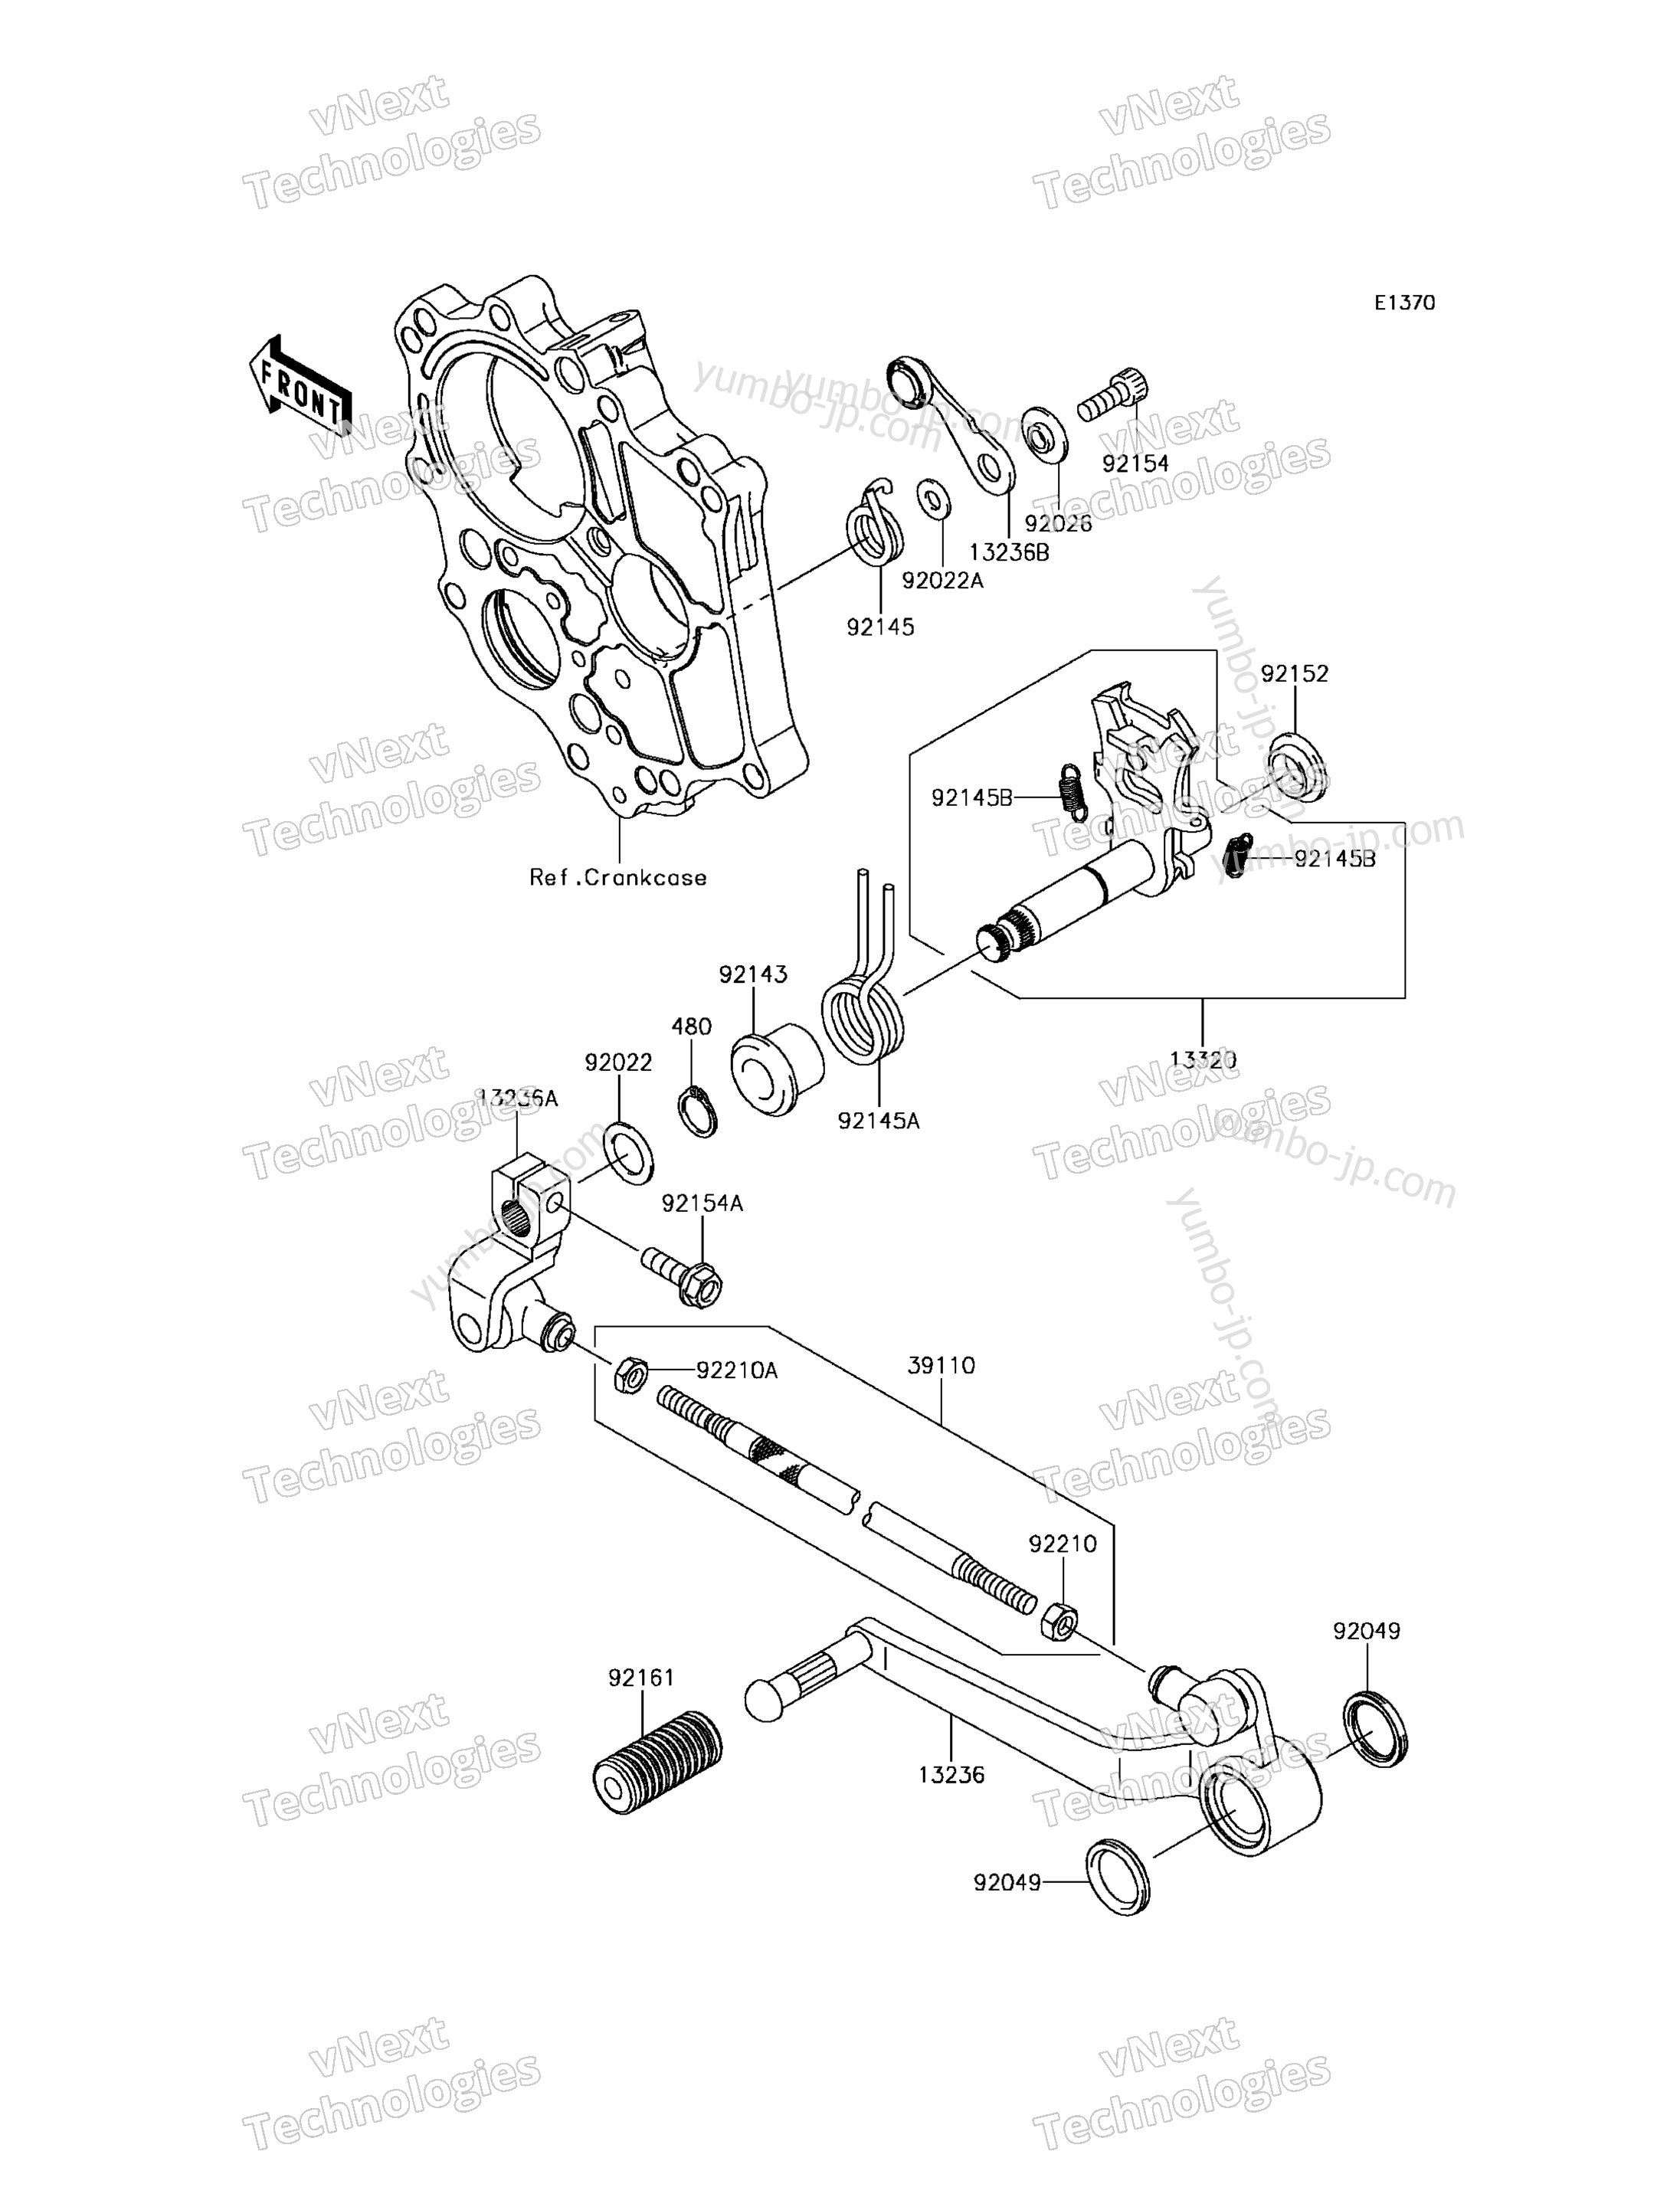 GEAR CHANGE MECHANISM for motorcycles KAWASAKI VERSYS 650 ABS (KLE650FHFA) 2017 year